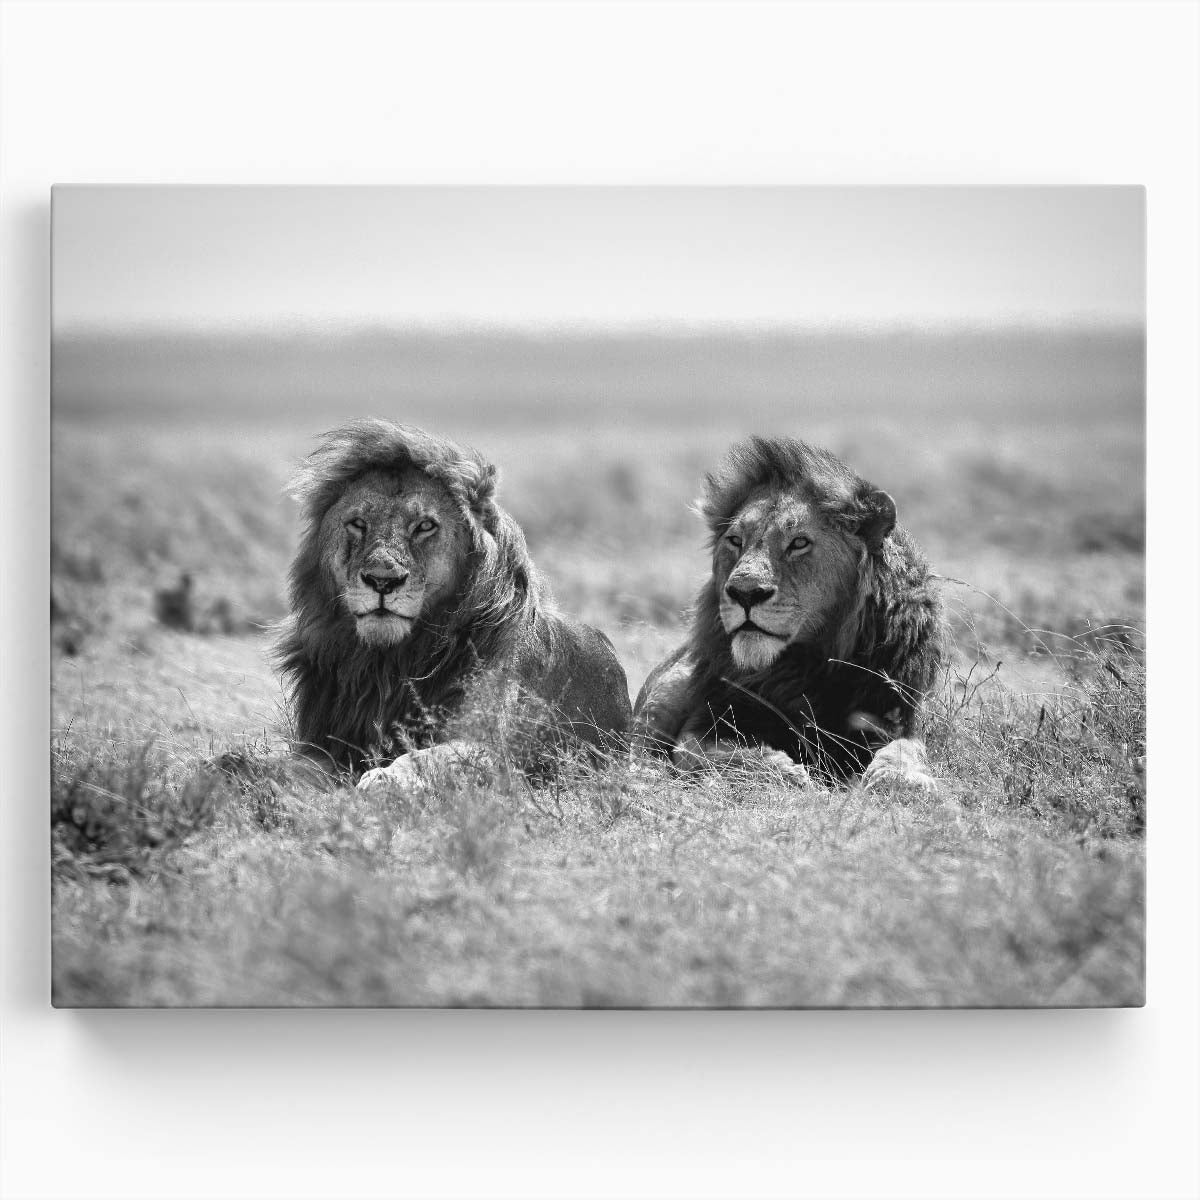 Serengeti Lion Duo Monochrome Wildlife Photography Wall Art by Luxuriance Designs. Made in USA.